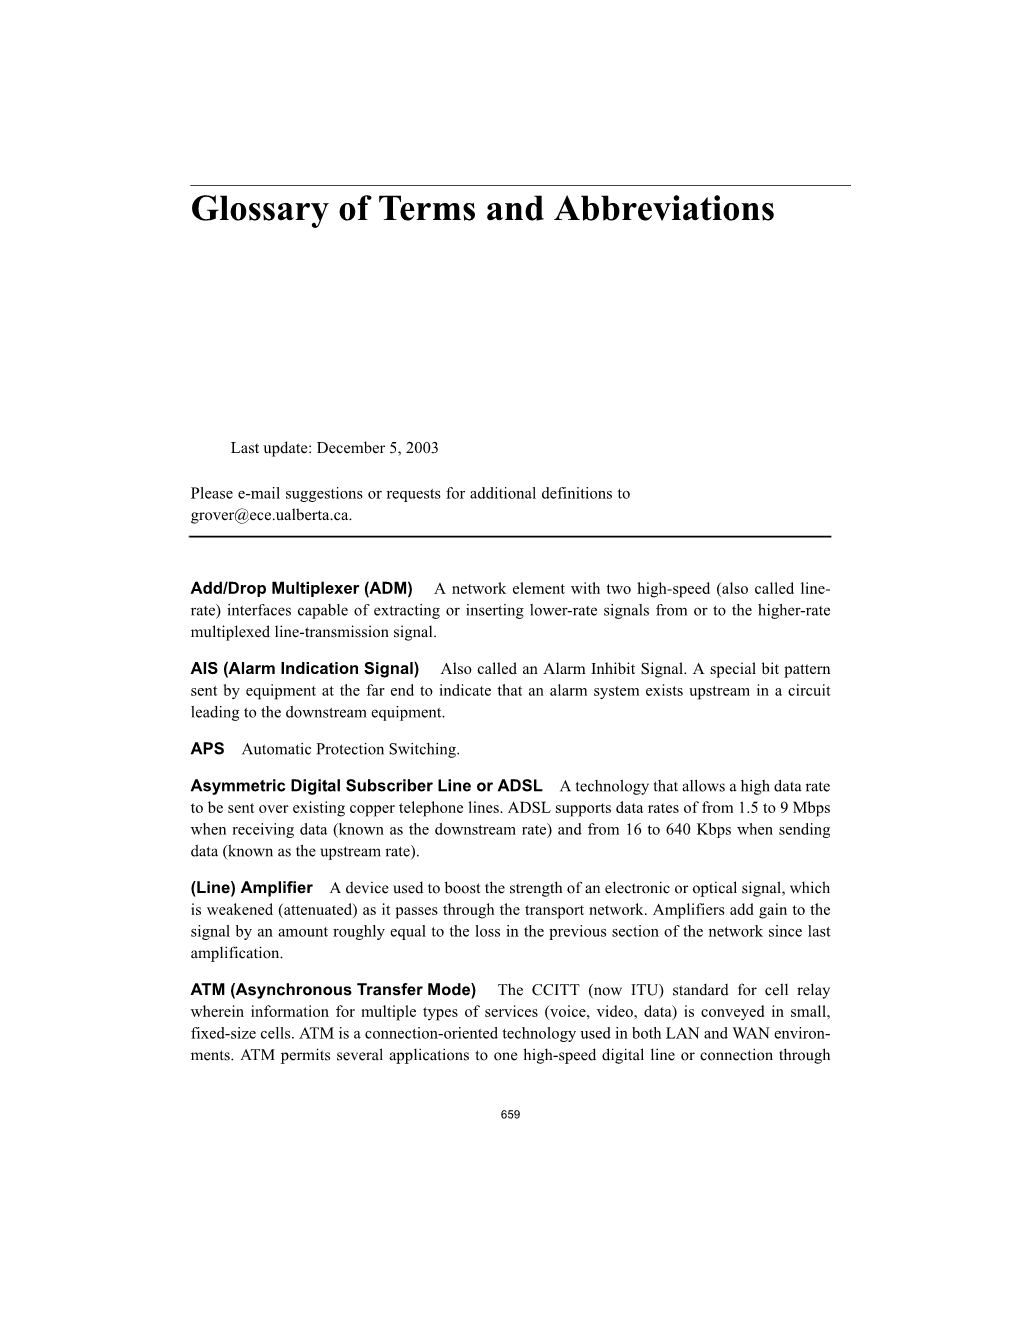 Glossary of Terms and Abbreviations